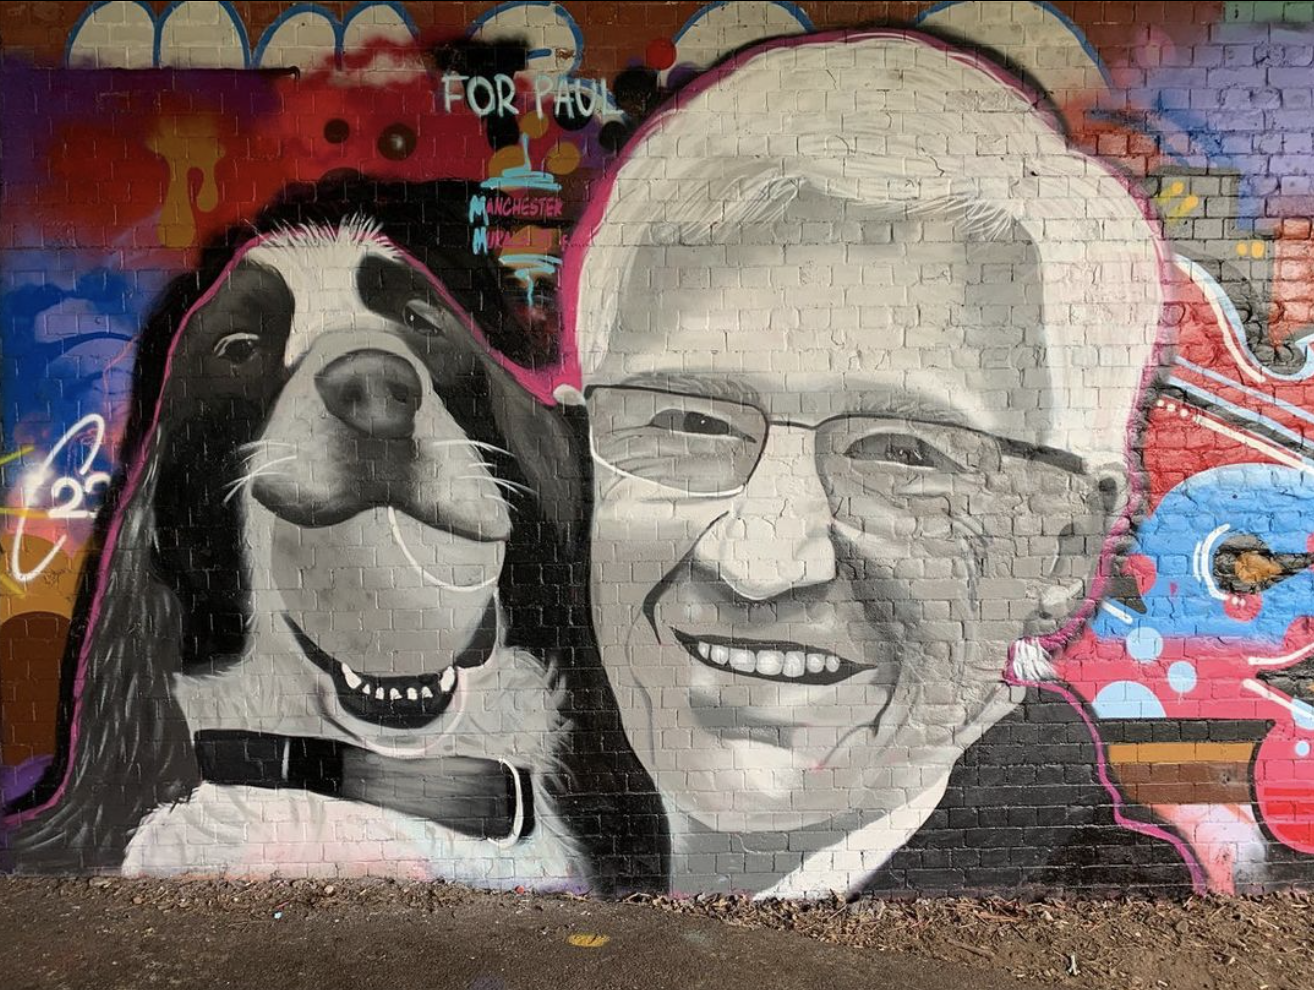 The Paul O'Grady mural in Manchester